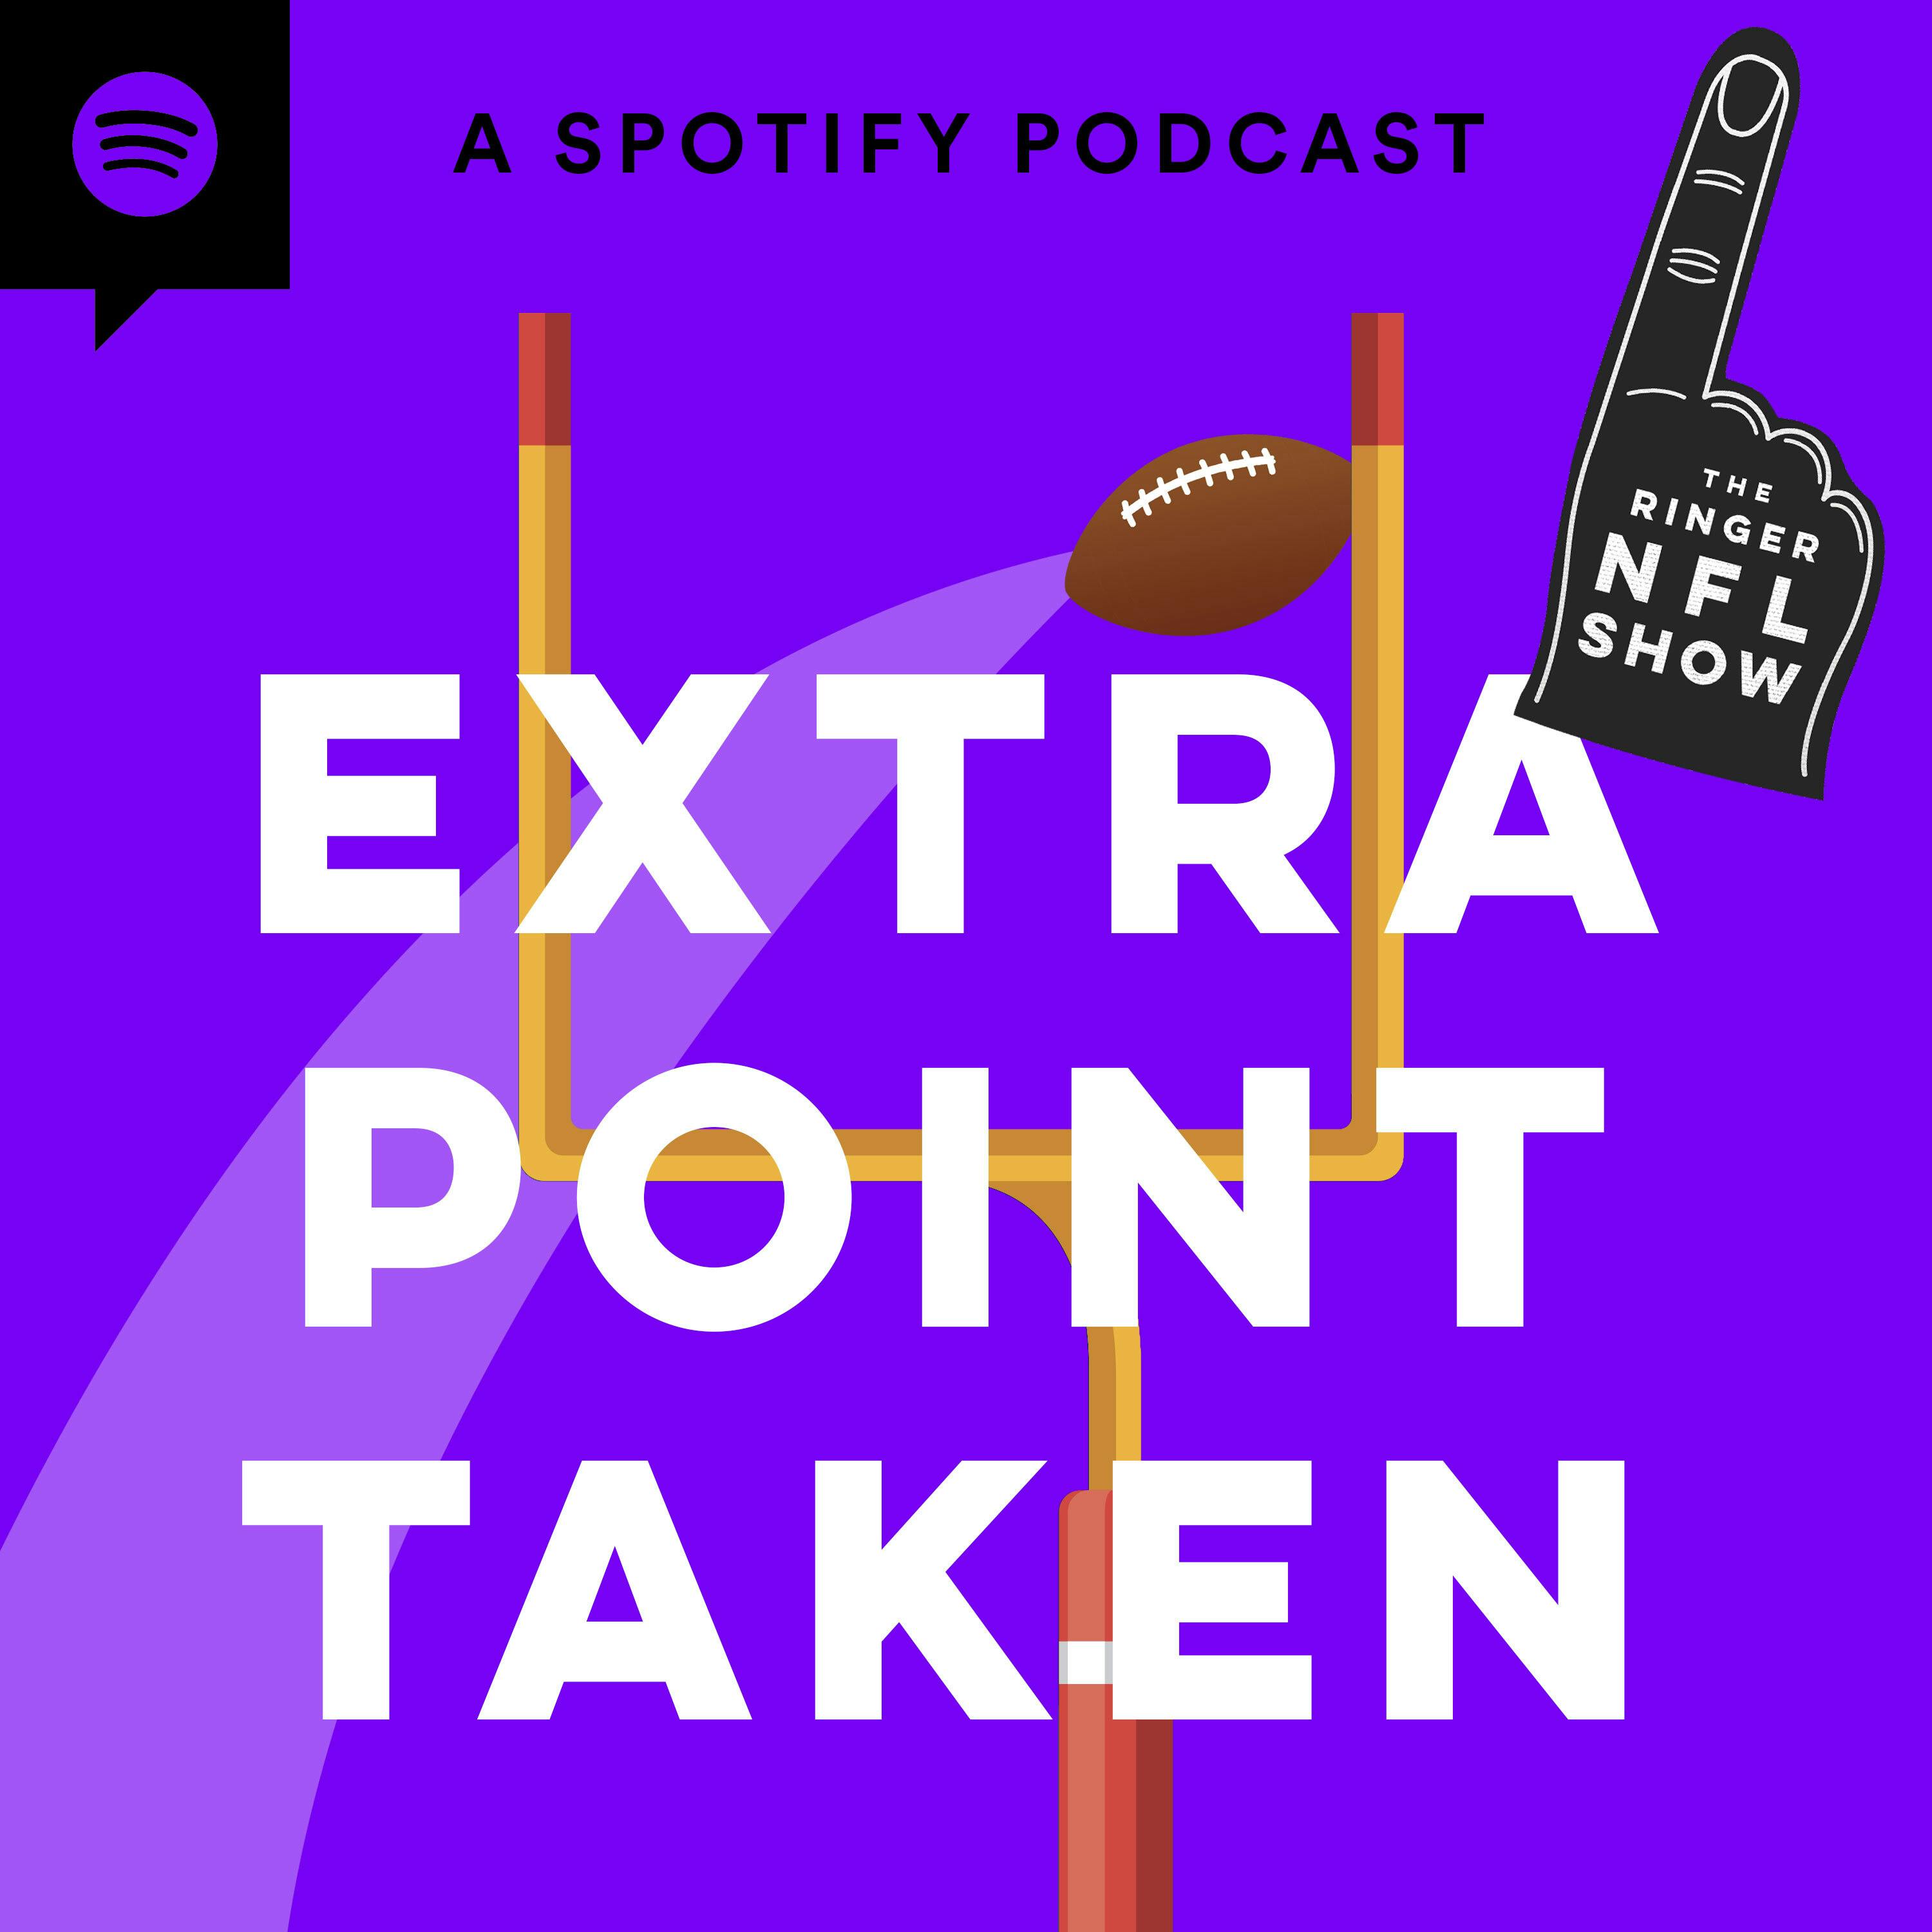 NFL Week 14 Picks, Props, and Predictions! | Extra Point Taken